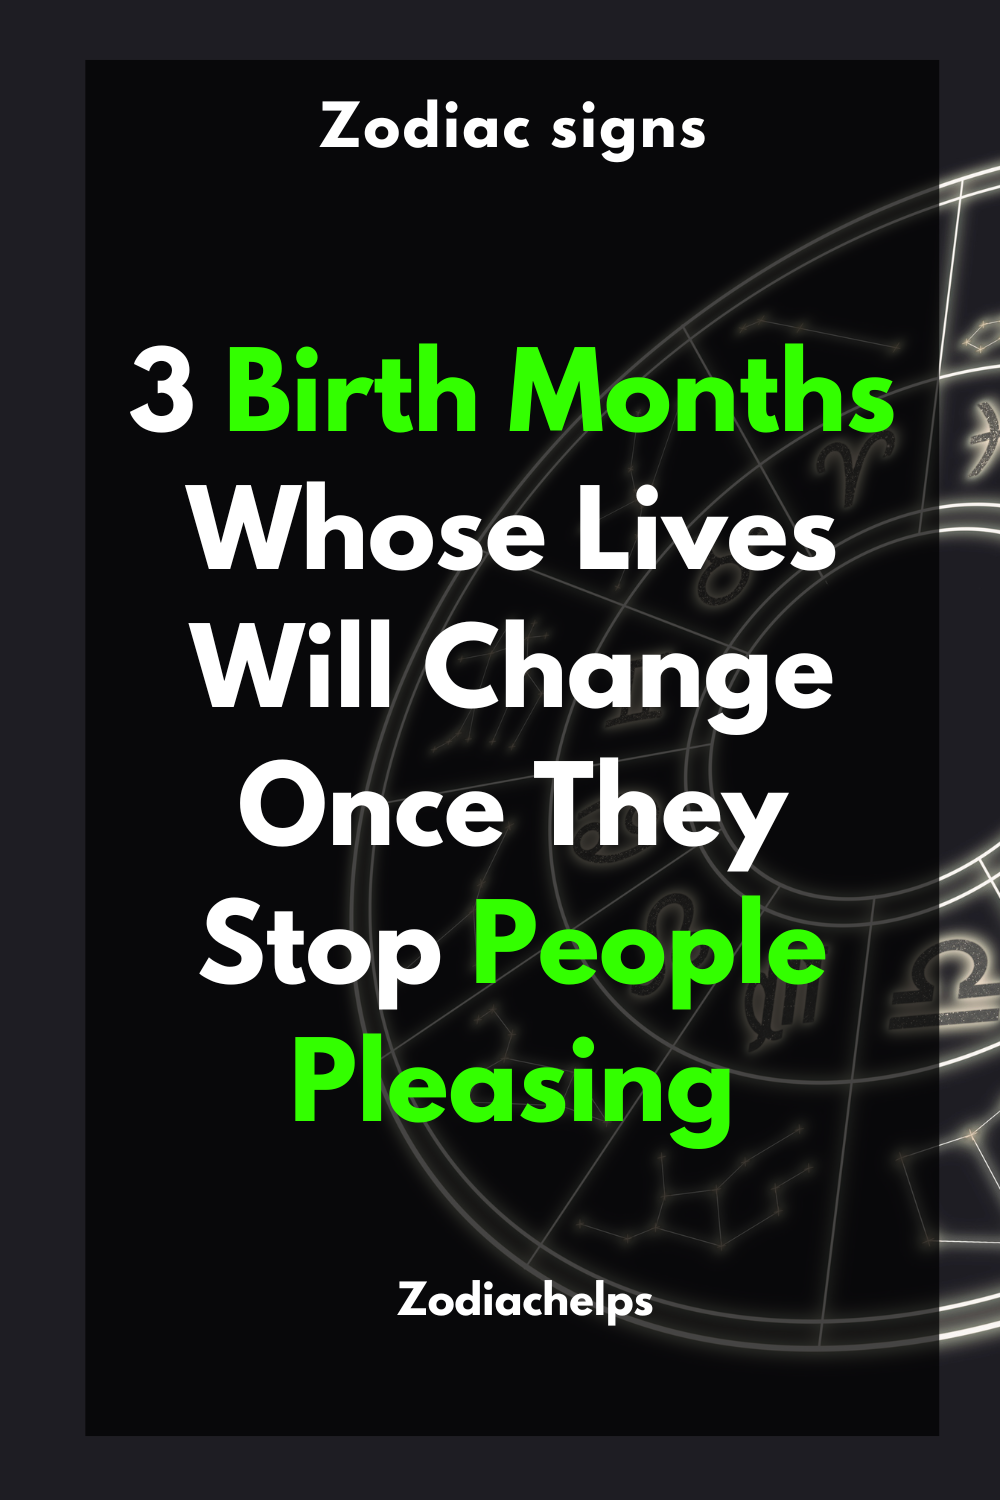 3 Birth Months Whose Lives Will Change Once They Stop People Pleasing